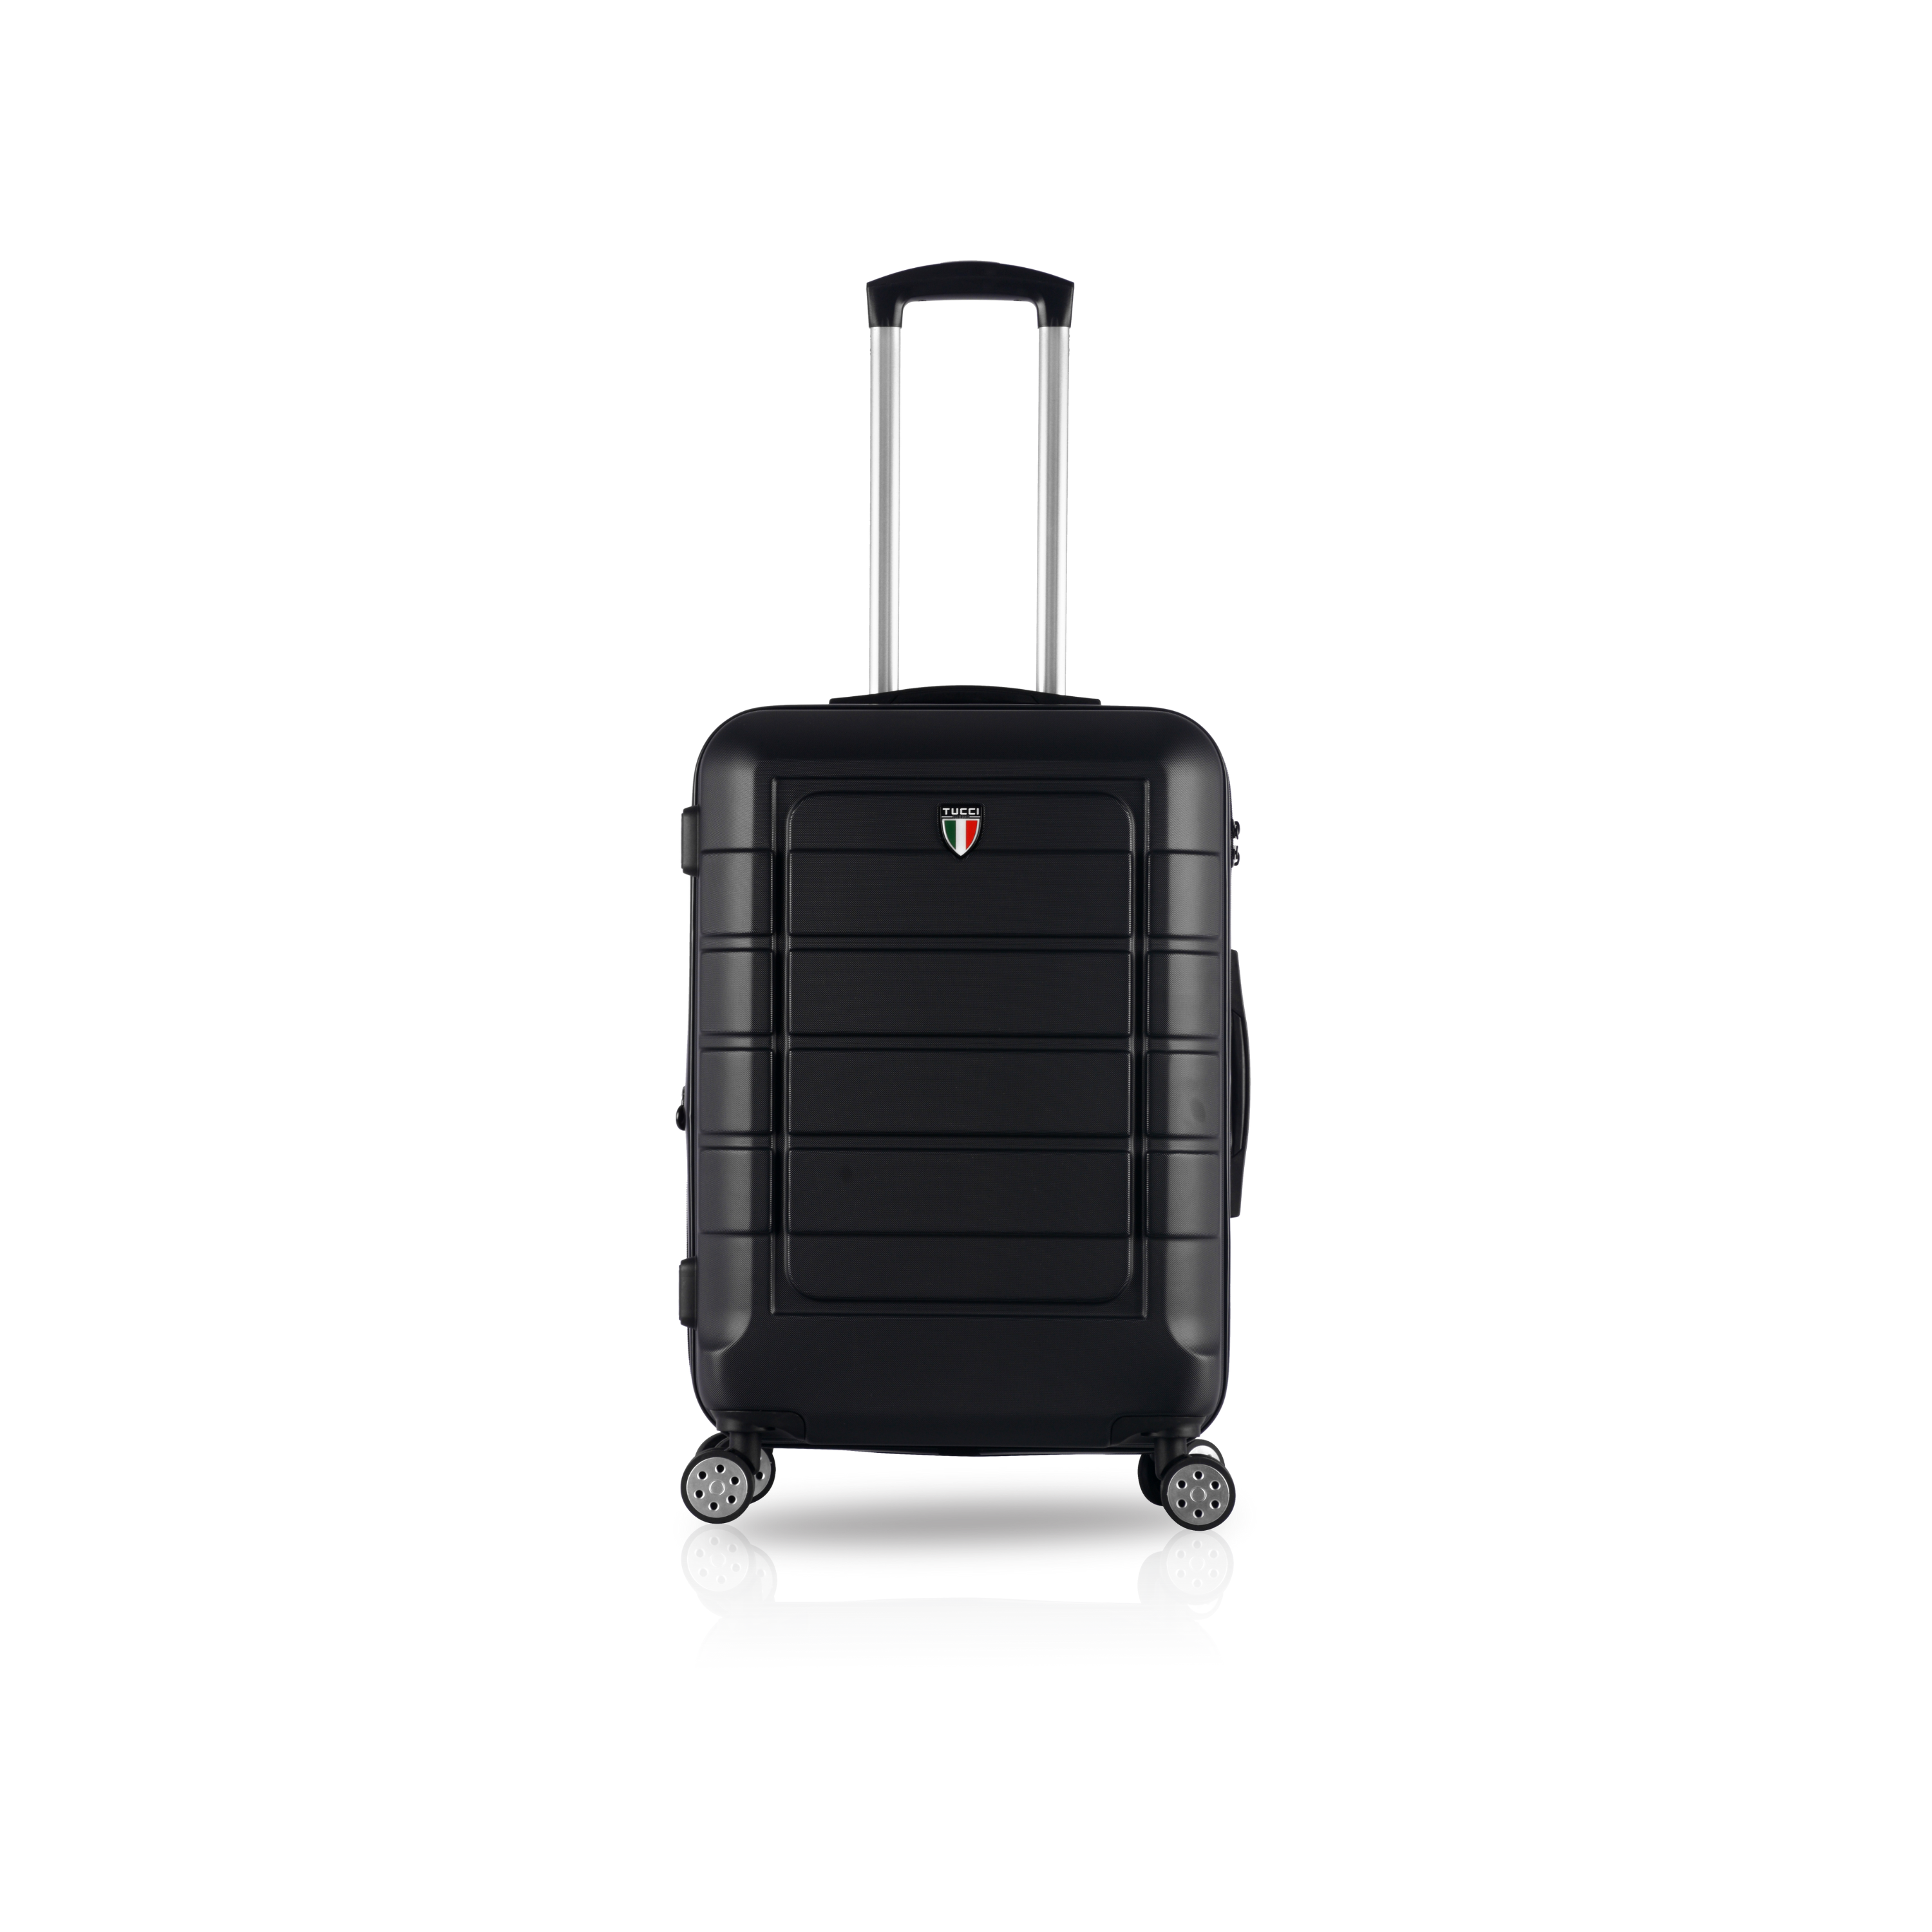 TUCCI CONSOLE ABS 20" Carry On Luggage